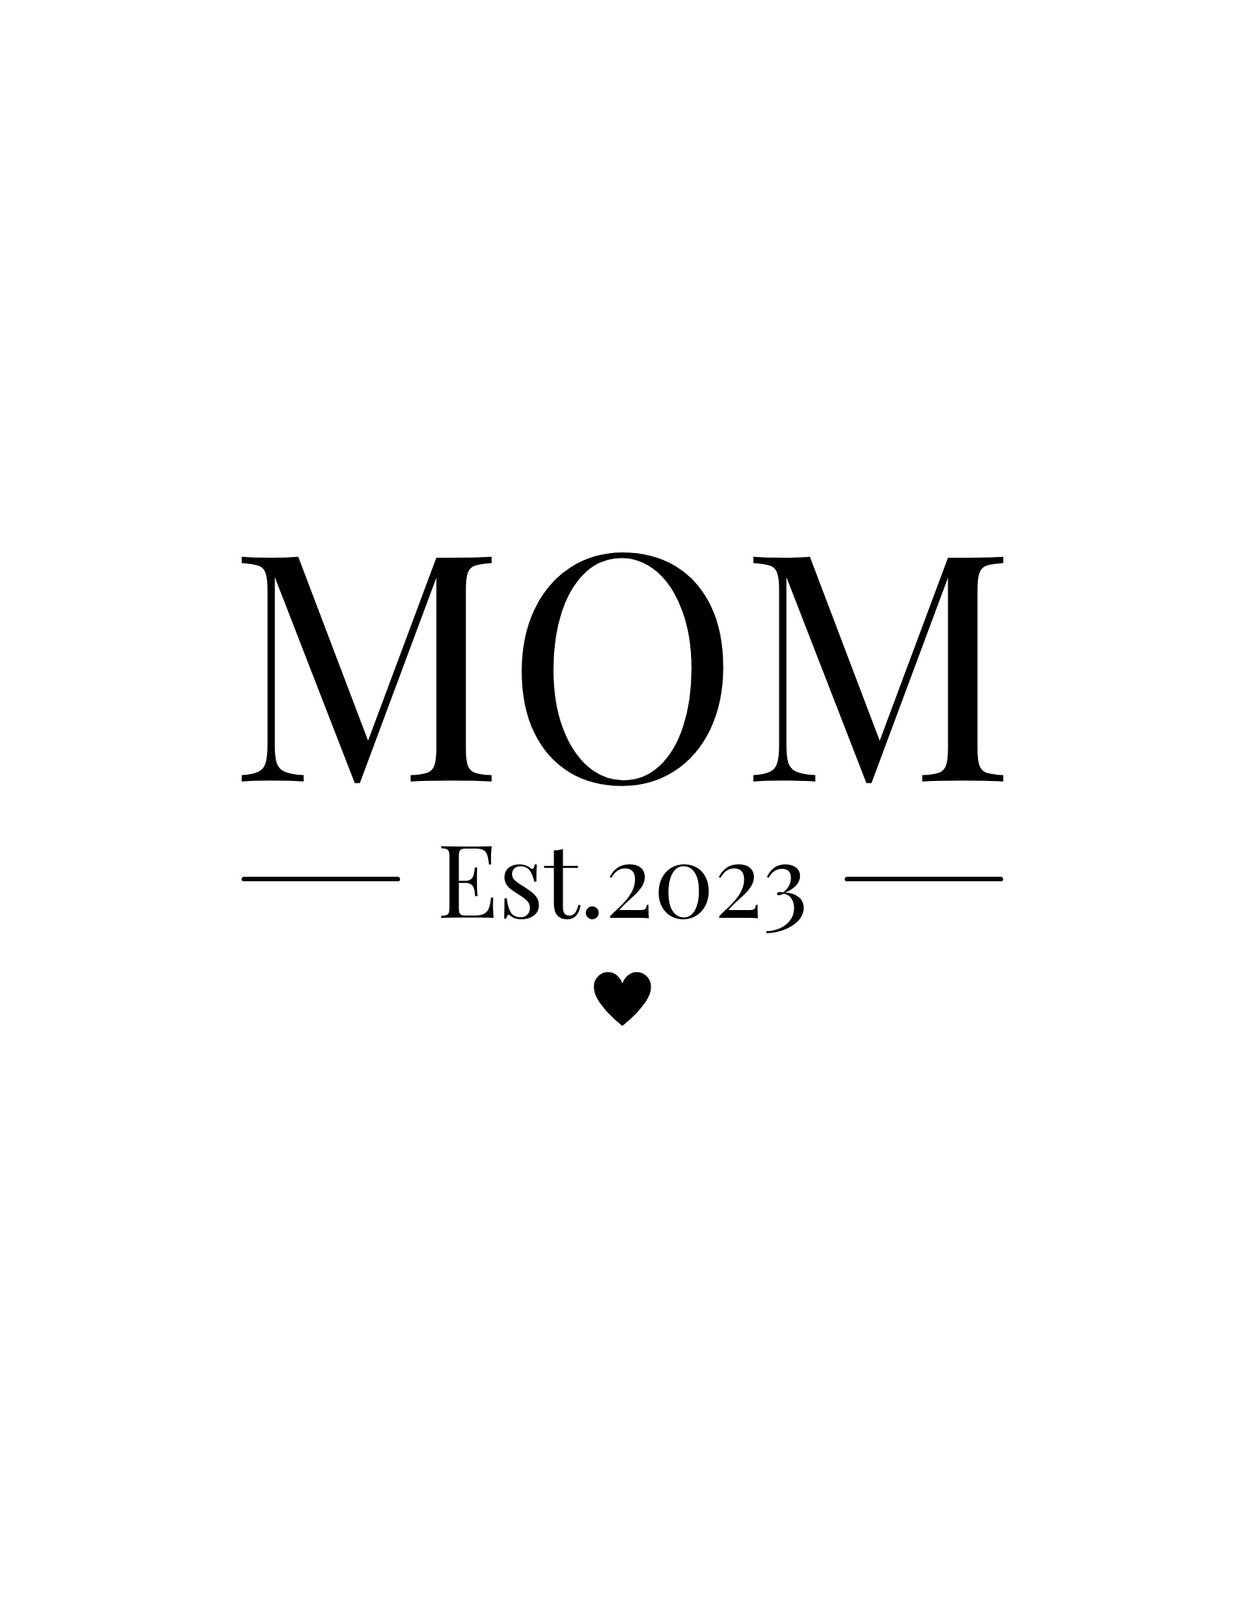 Free and customizable mom templates